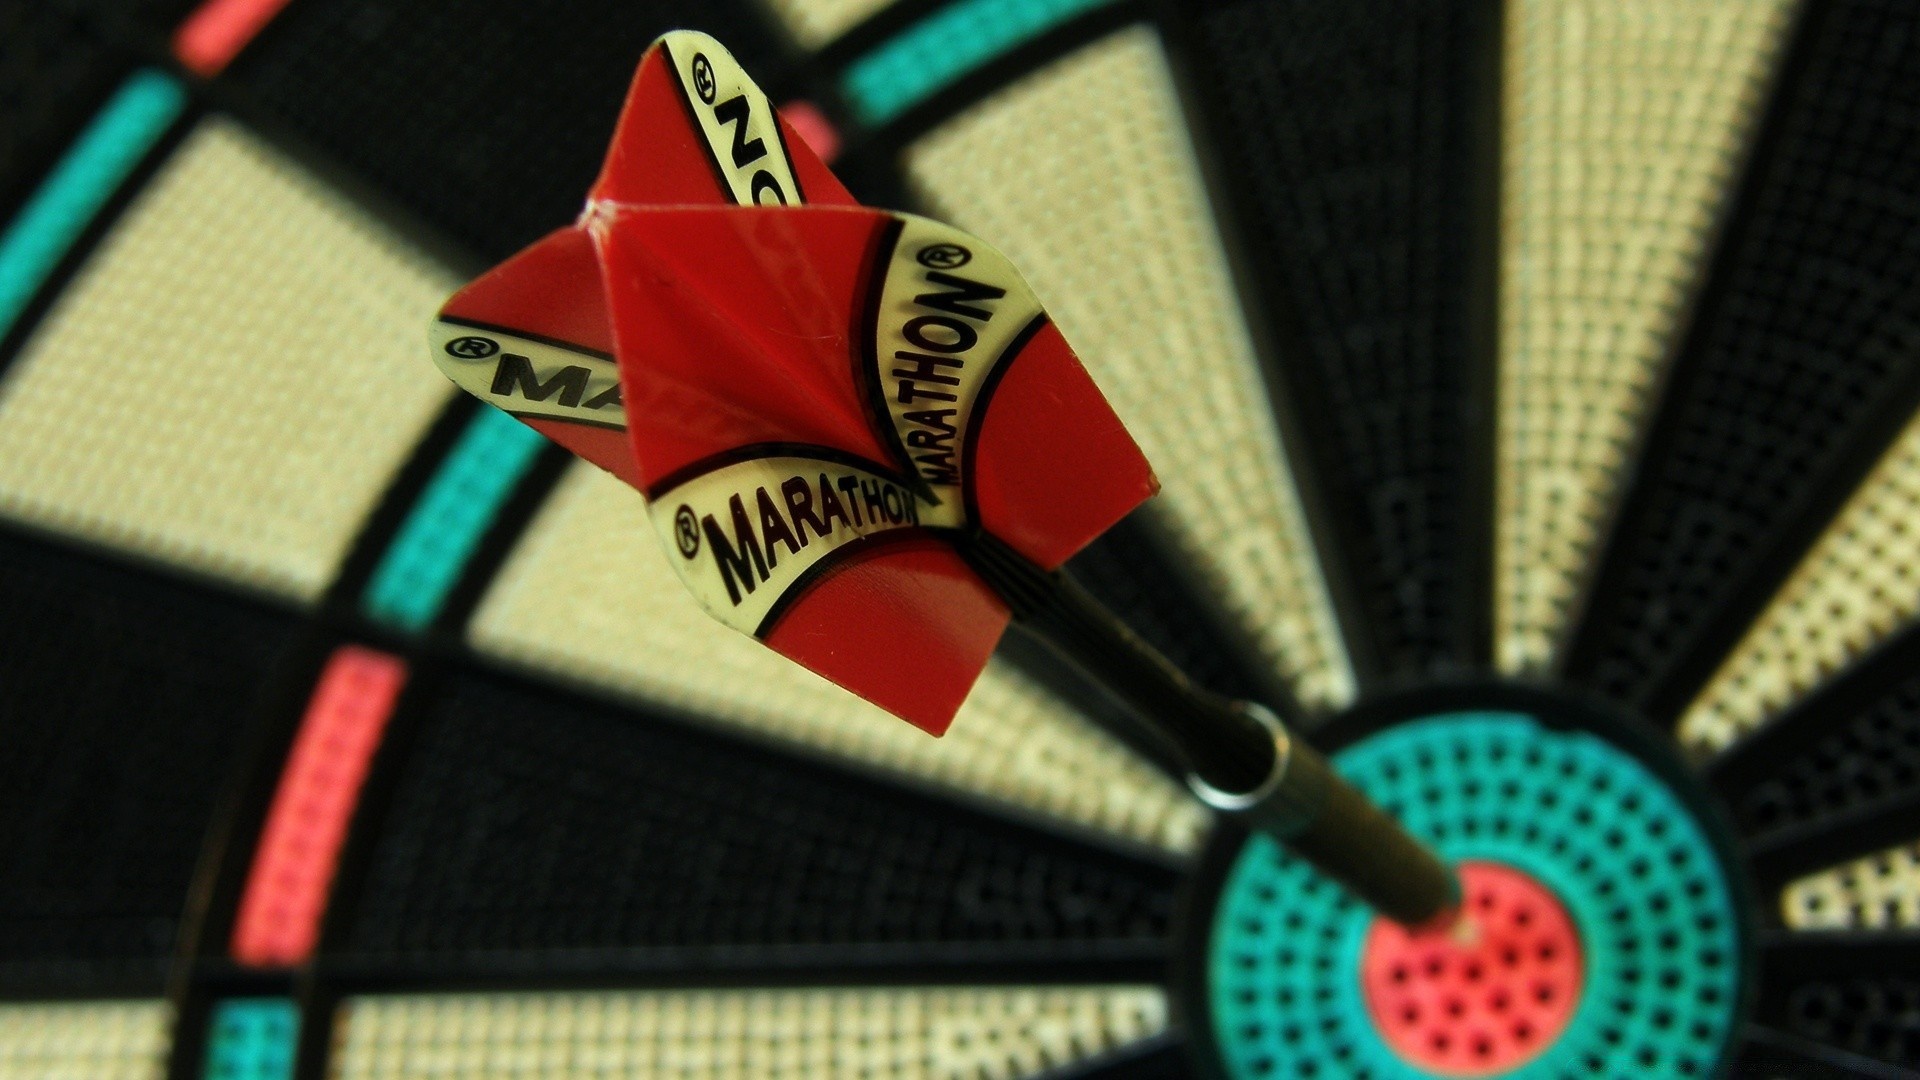 Darts: A soft tip board, A tournament and league play, Cricket games. 1920x1080 Full HD Background.